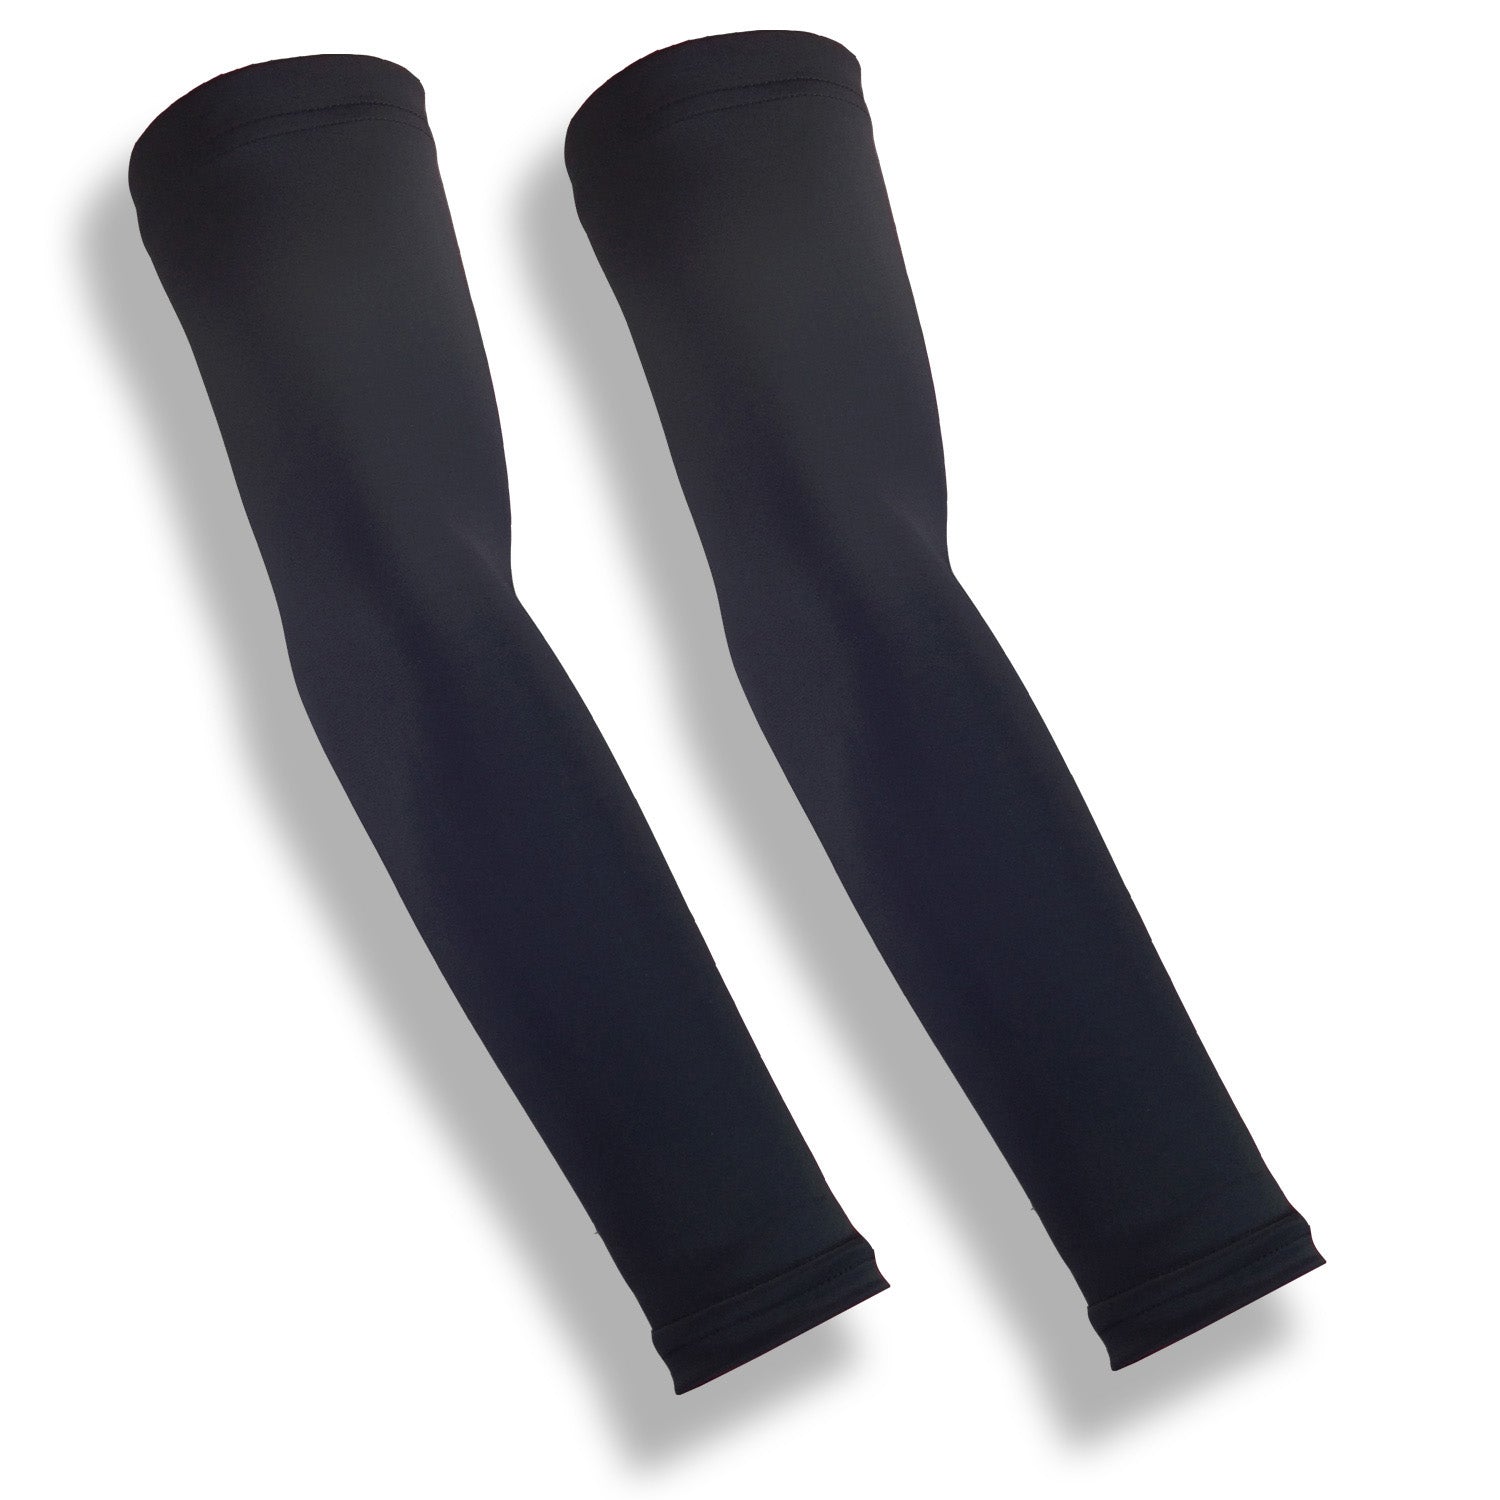 Black Full Arm Volleyball Sleeves